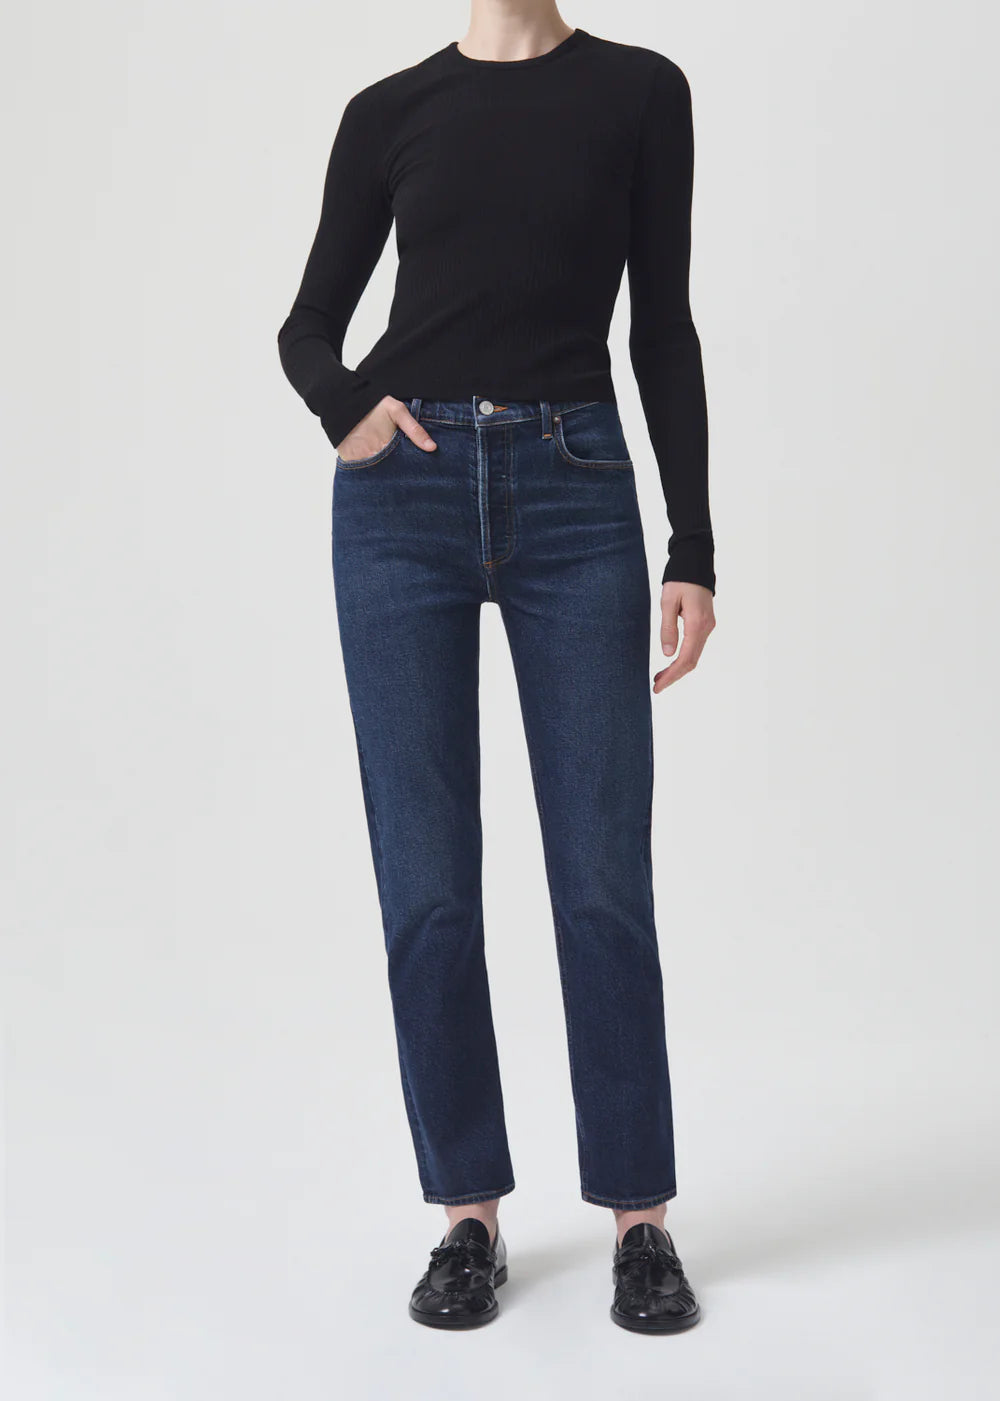 The model is wearing Riley Straight Long - Divided jeans by AGOLDE.